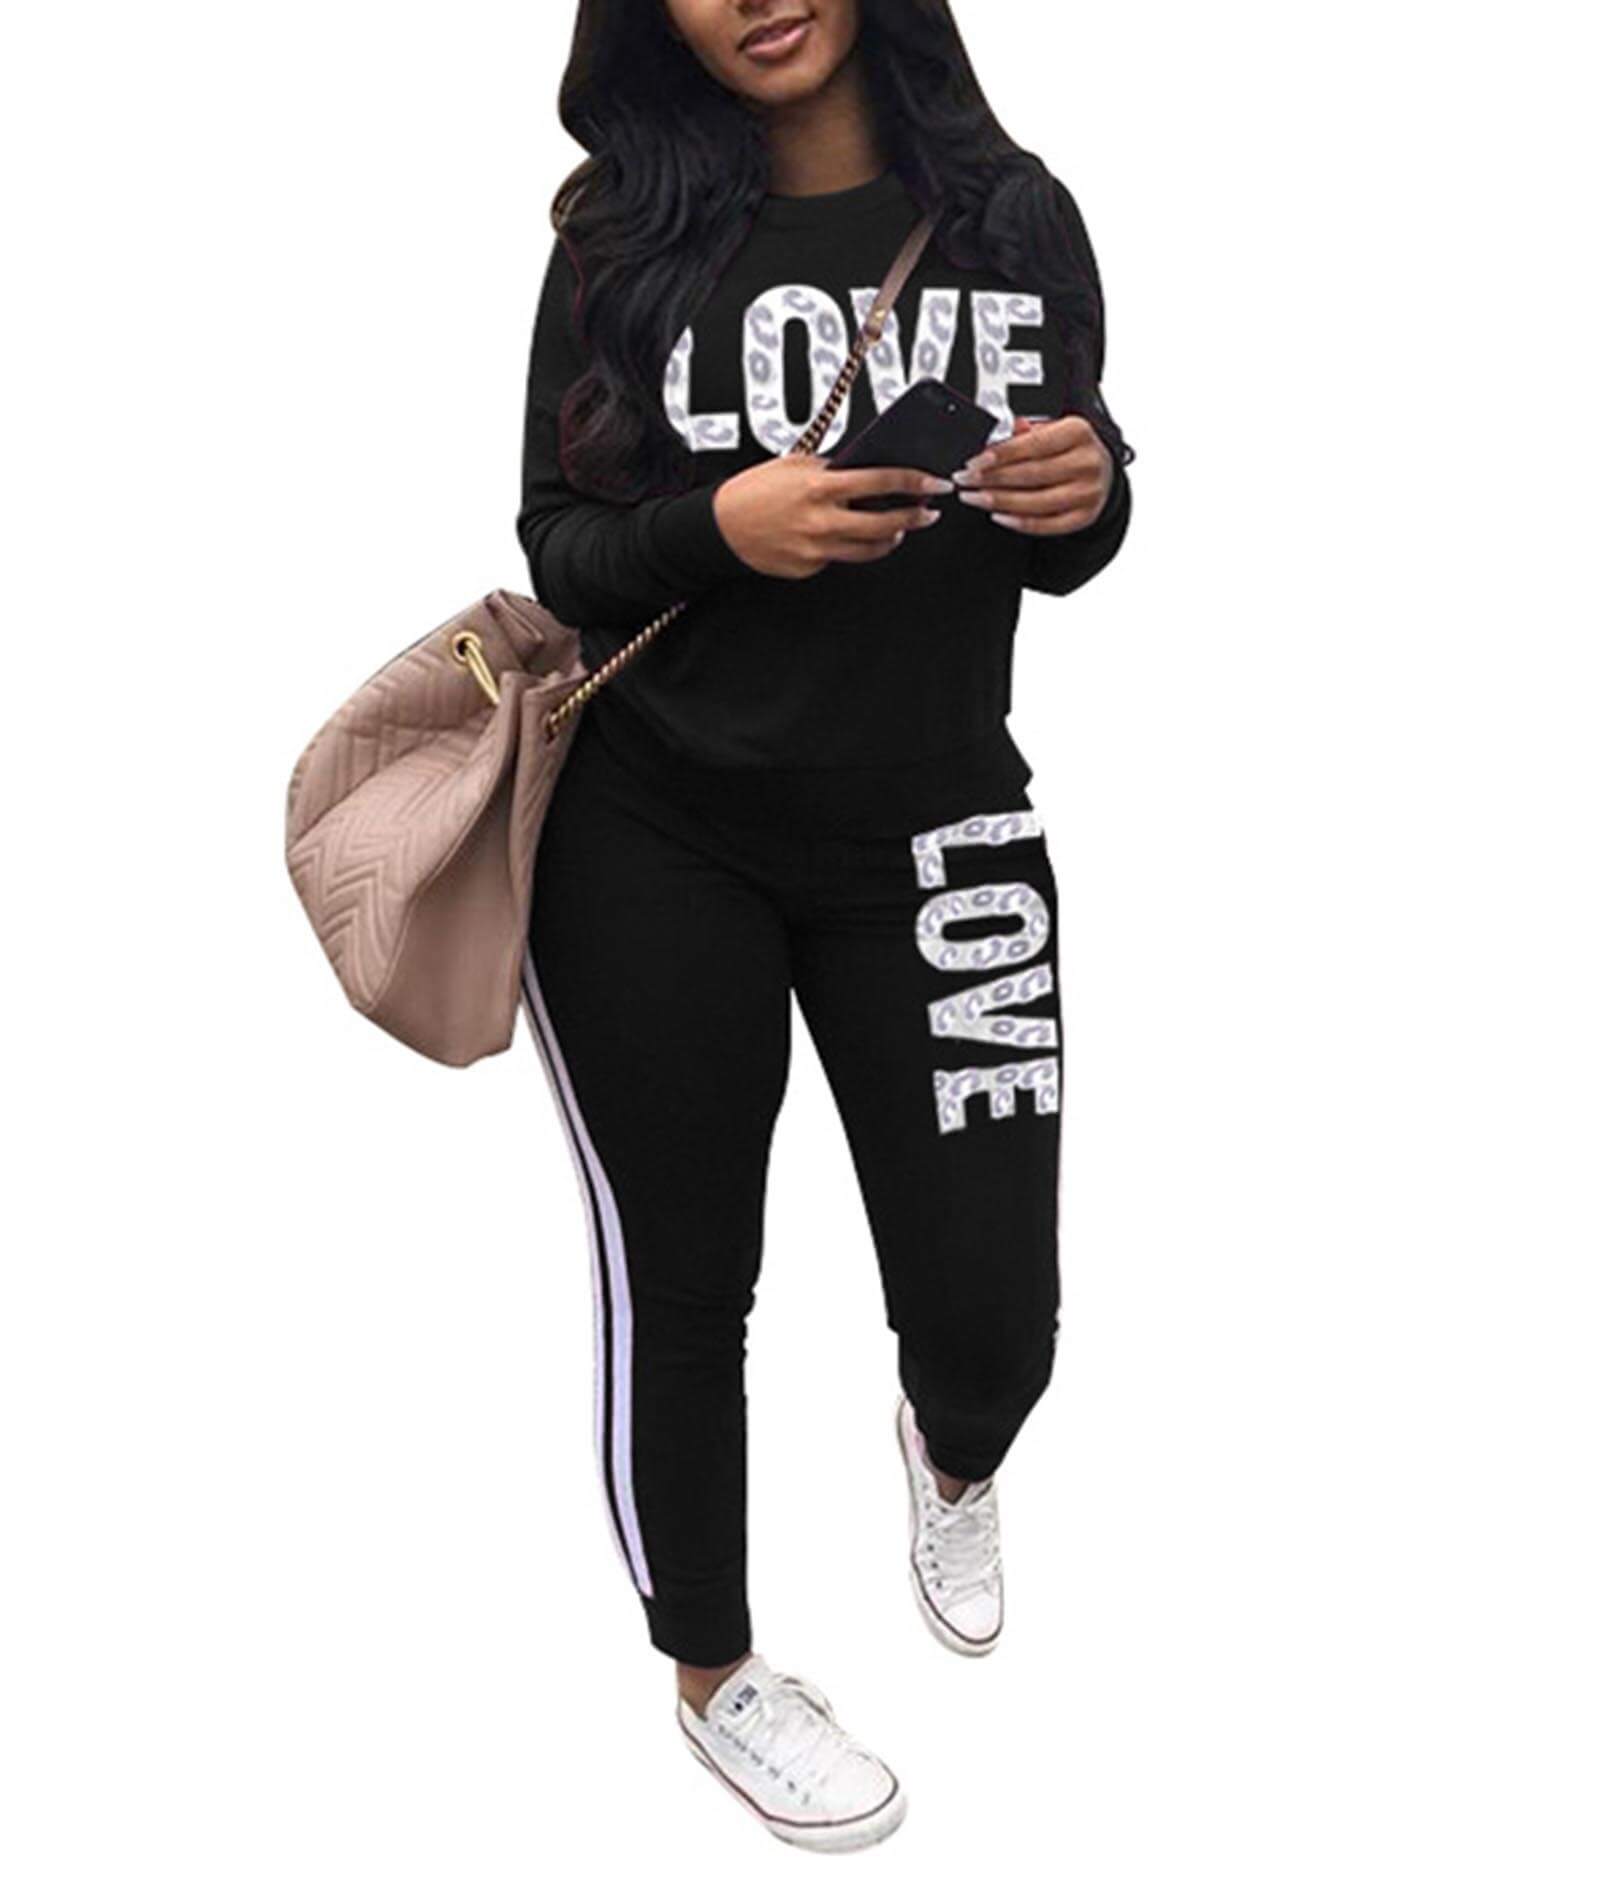  Women's Casual 2 Piece Camouflage Letter Print Outfits Pullover Sweatshirt Tops and Long Pants Tracksuits Set